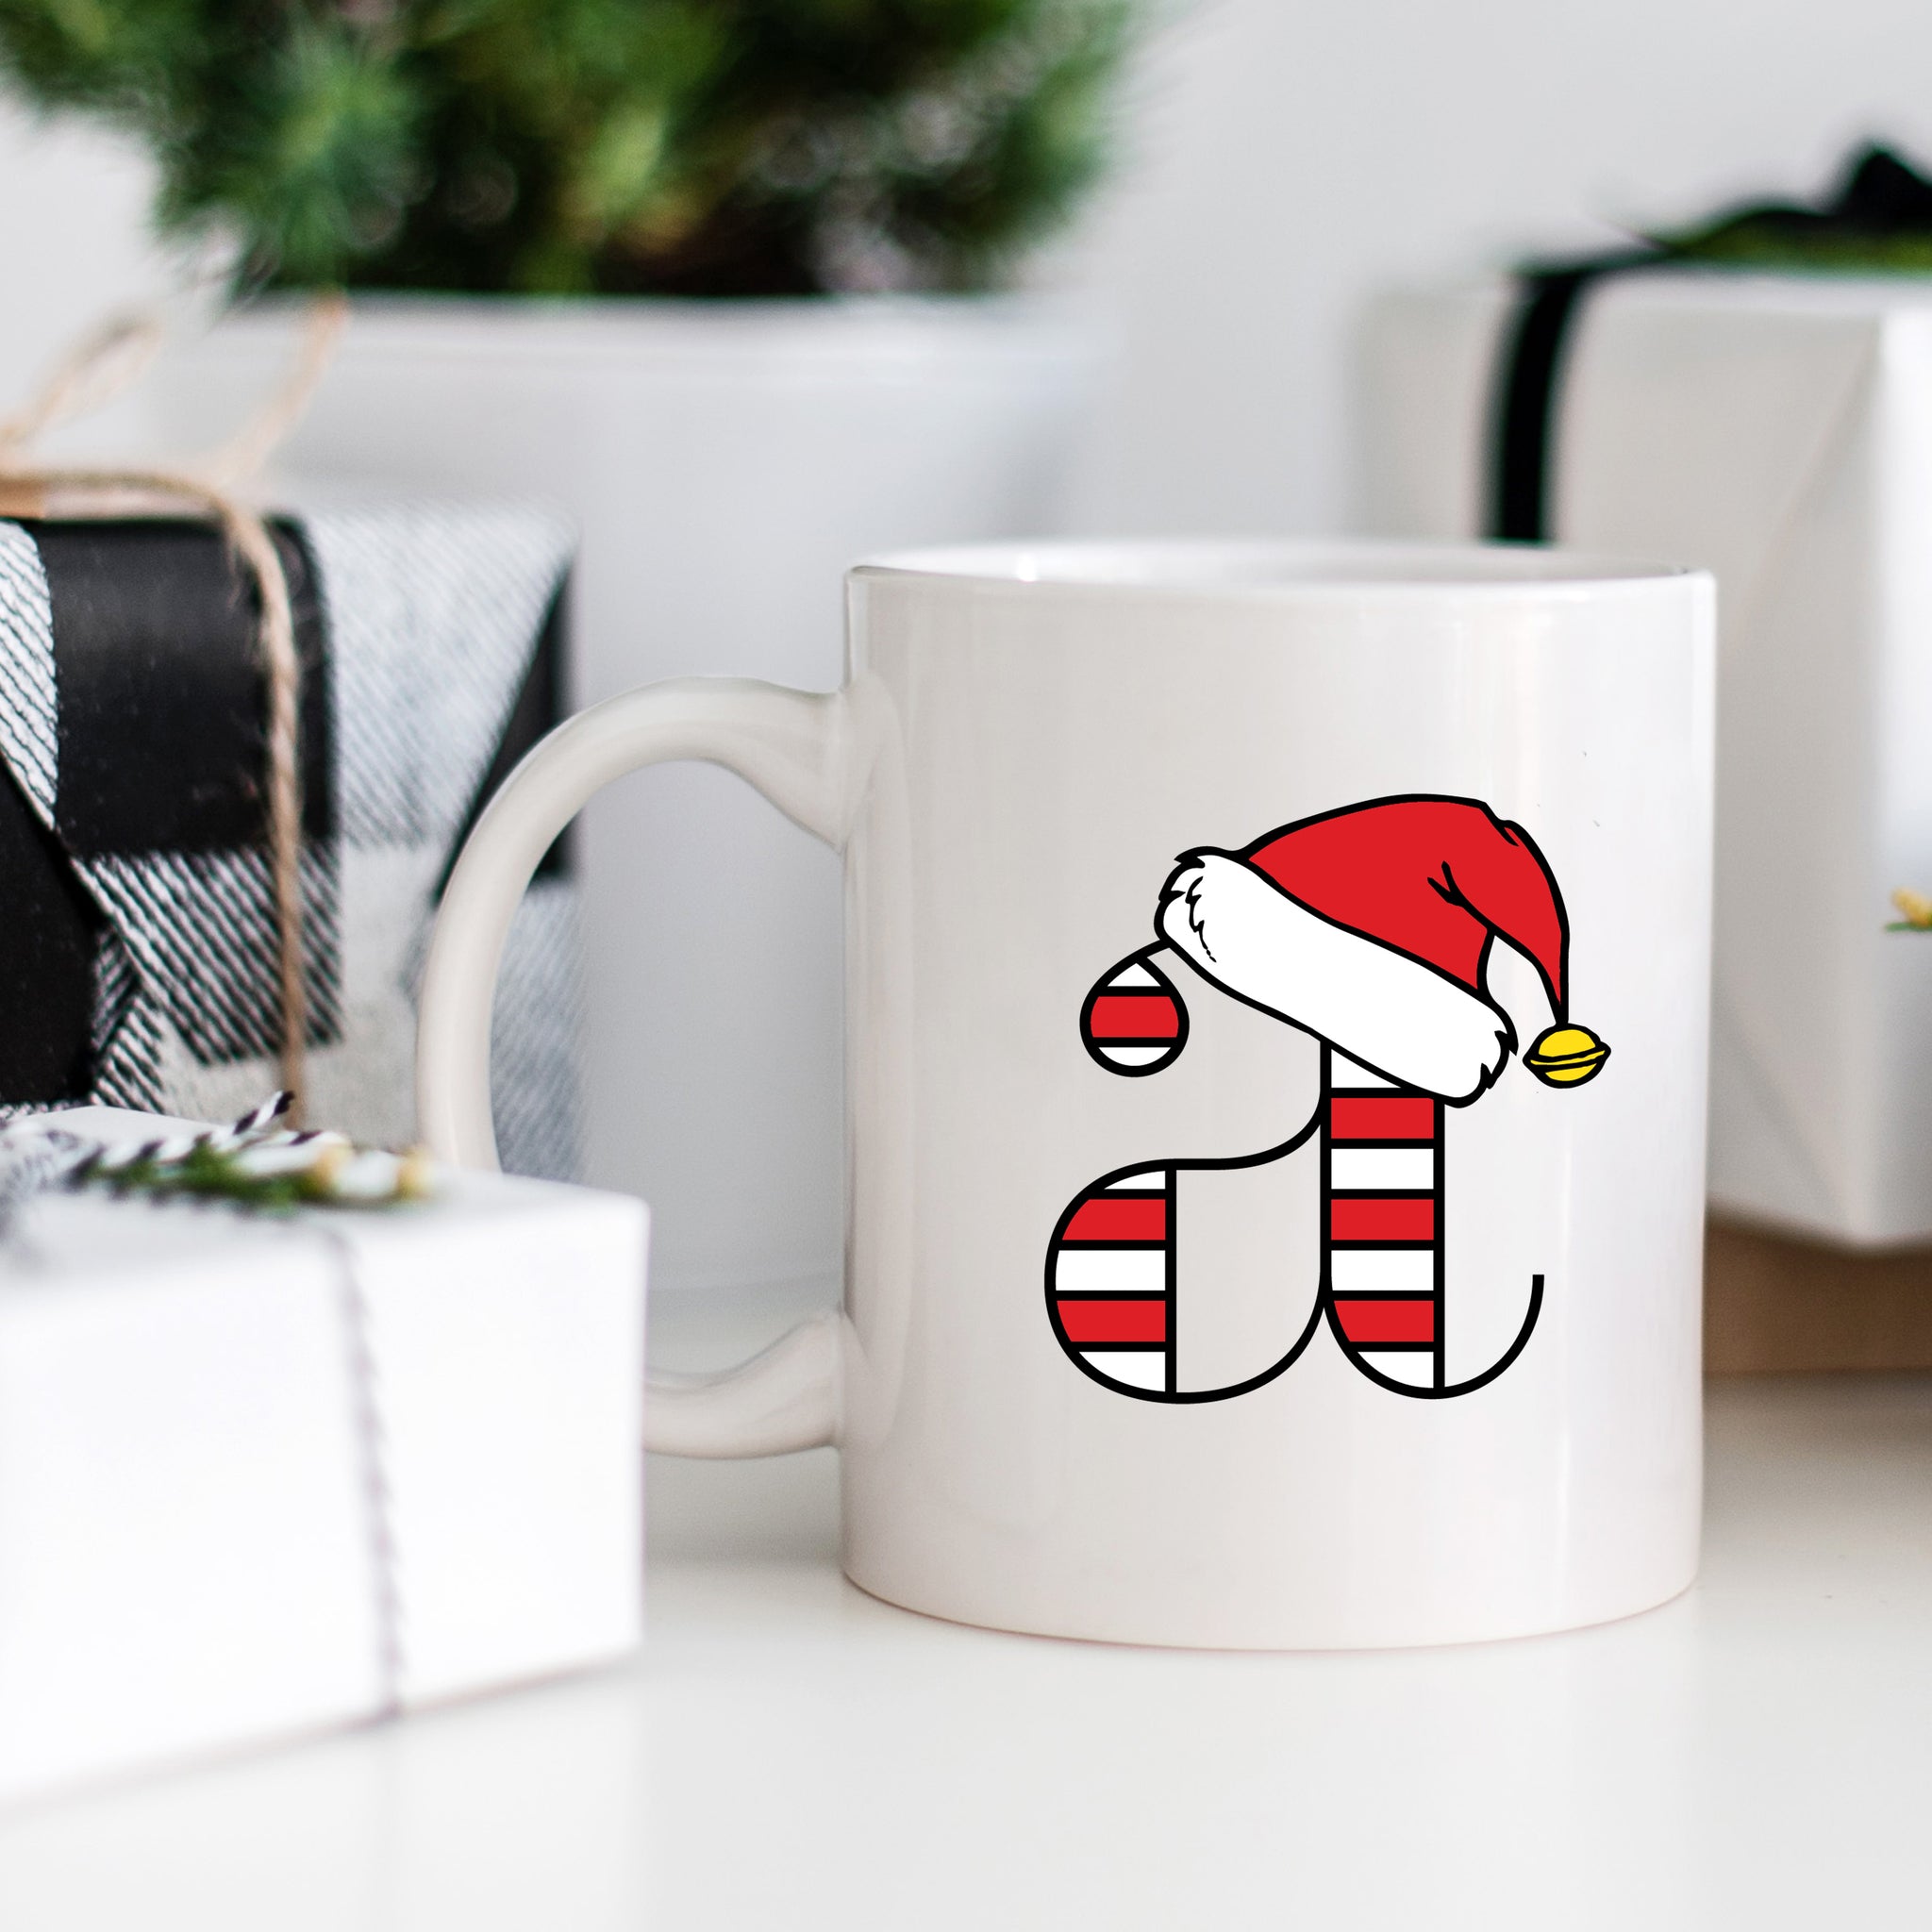 Monogram Holiday Mugs Are Here! - Pretty Collected